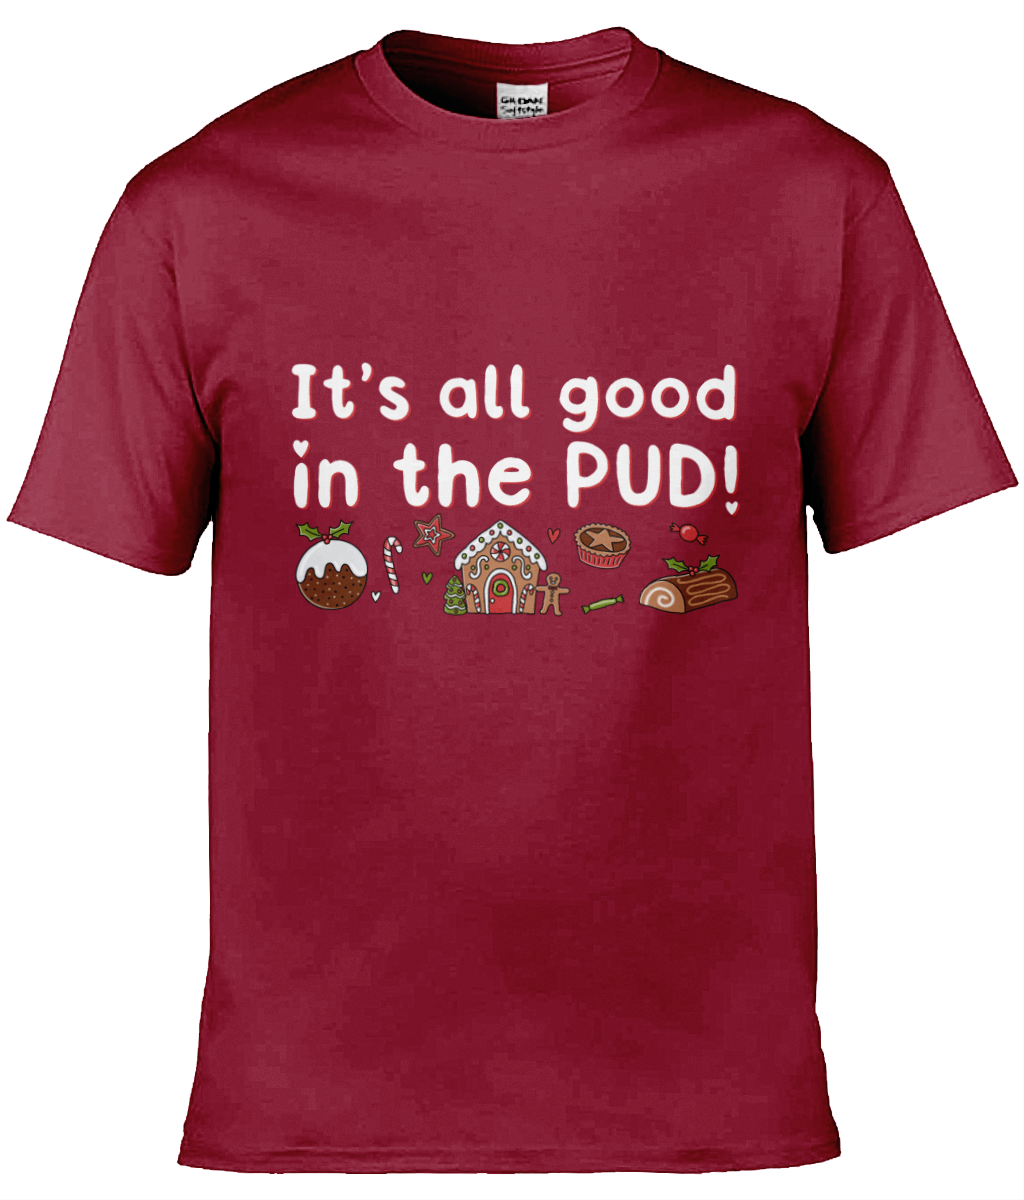 It's All Good In The Pud - Christmas T-shirt 2 - Multi Colour Available